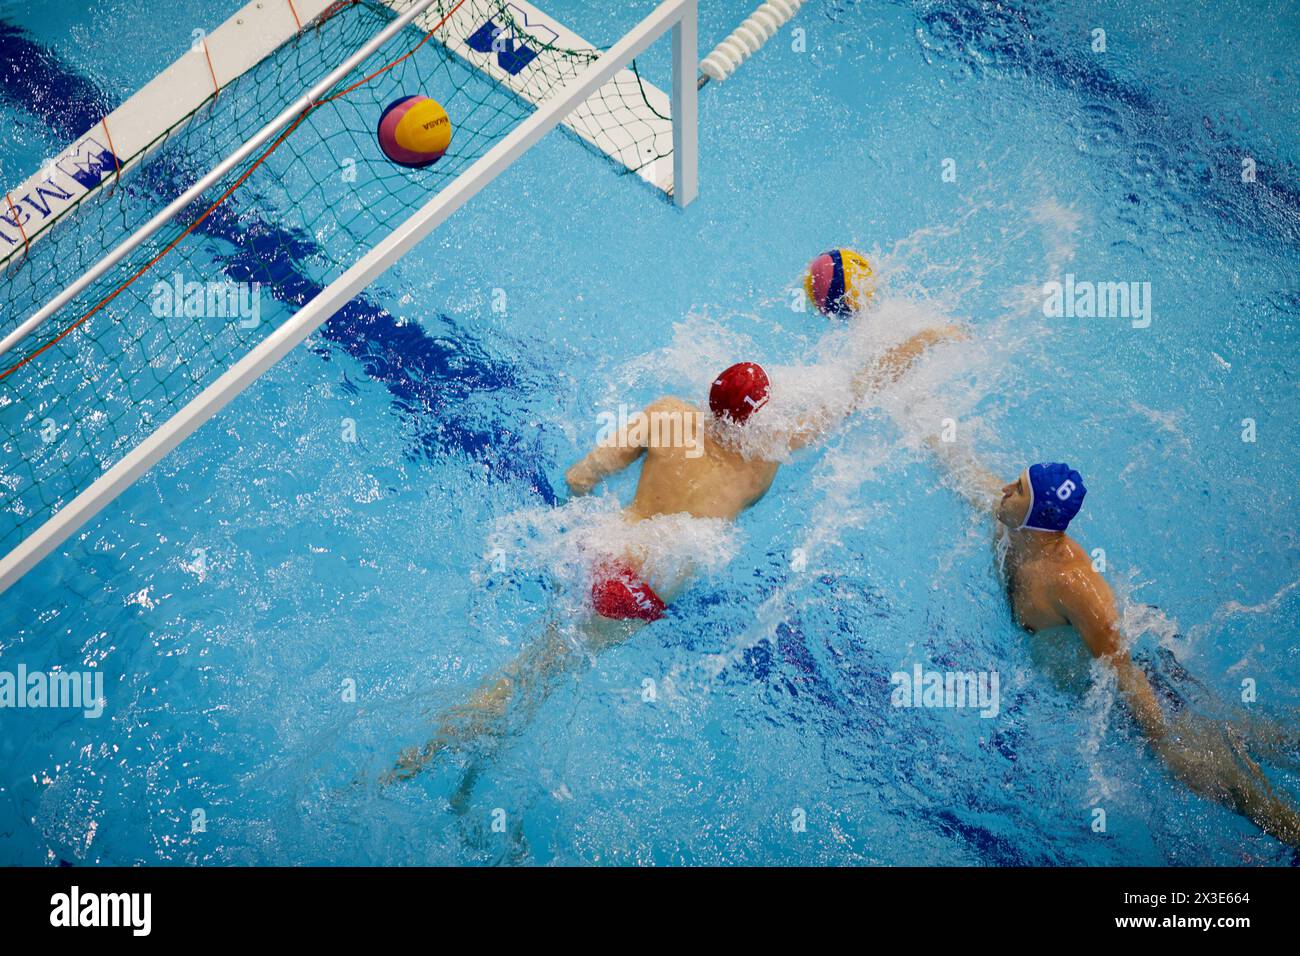 KAZAN, RUSSIA - DEC 09, 2017: Players of teams near goal during friendly match on water polo in Burevestnik basin during All Russia Swimming Competiti Stock Photo